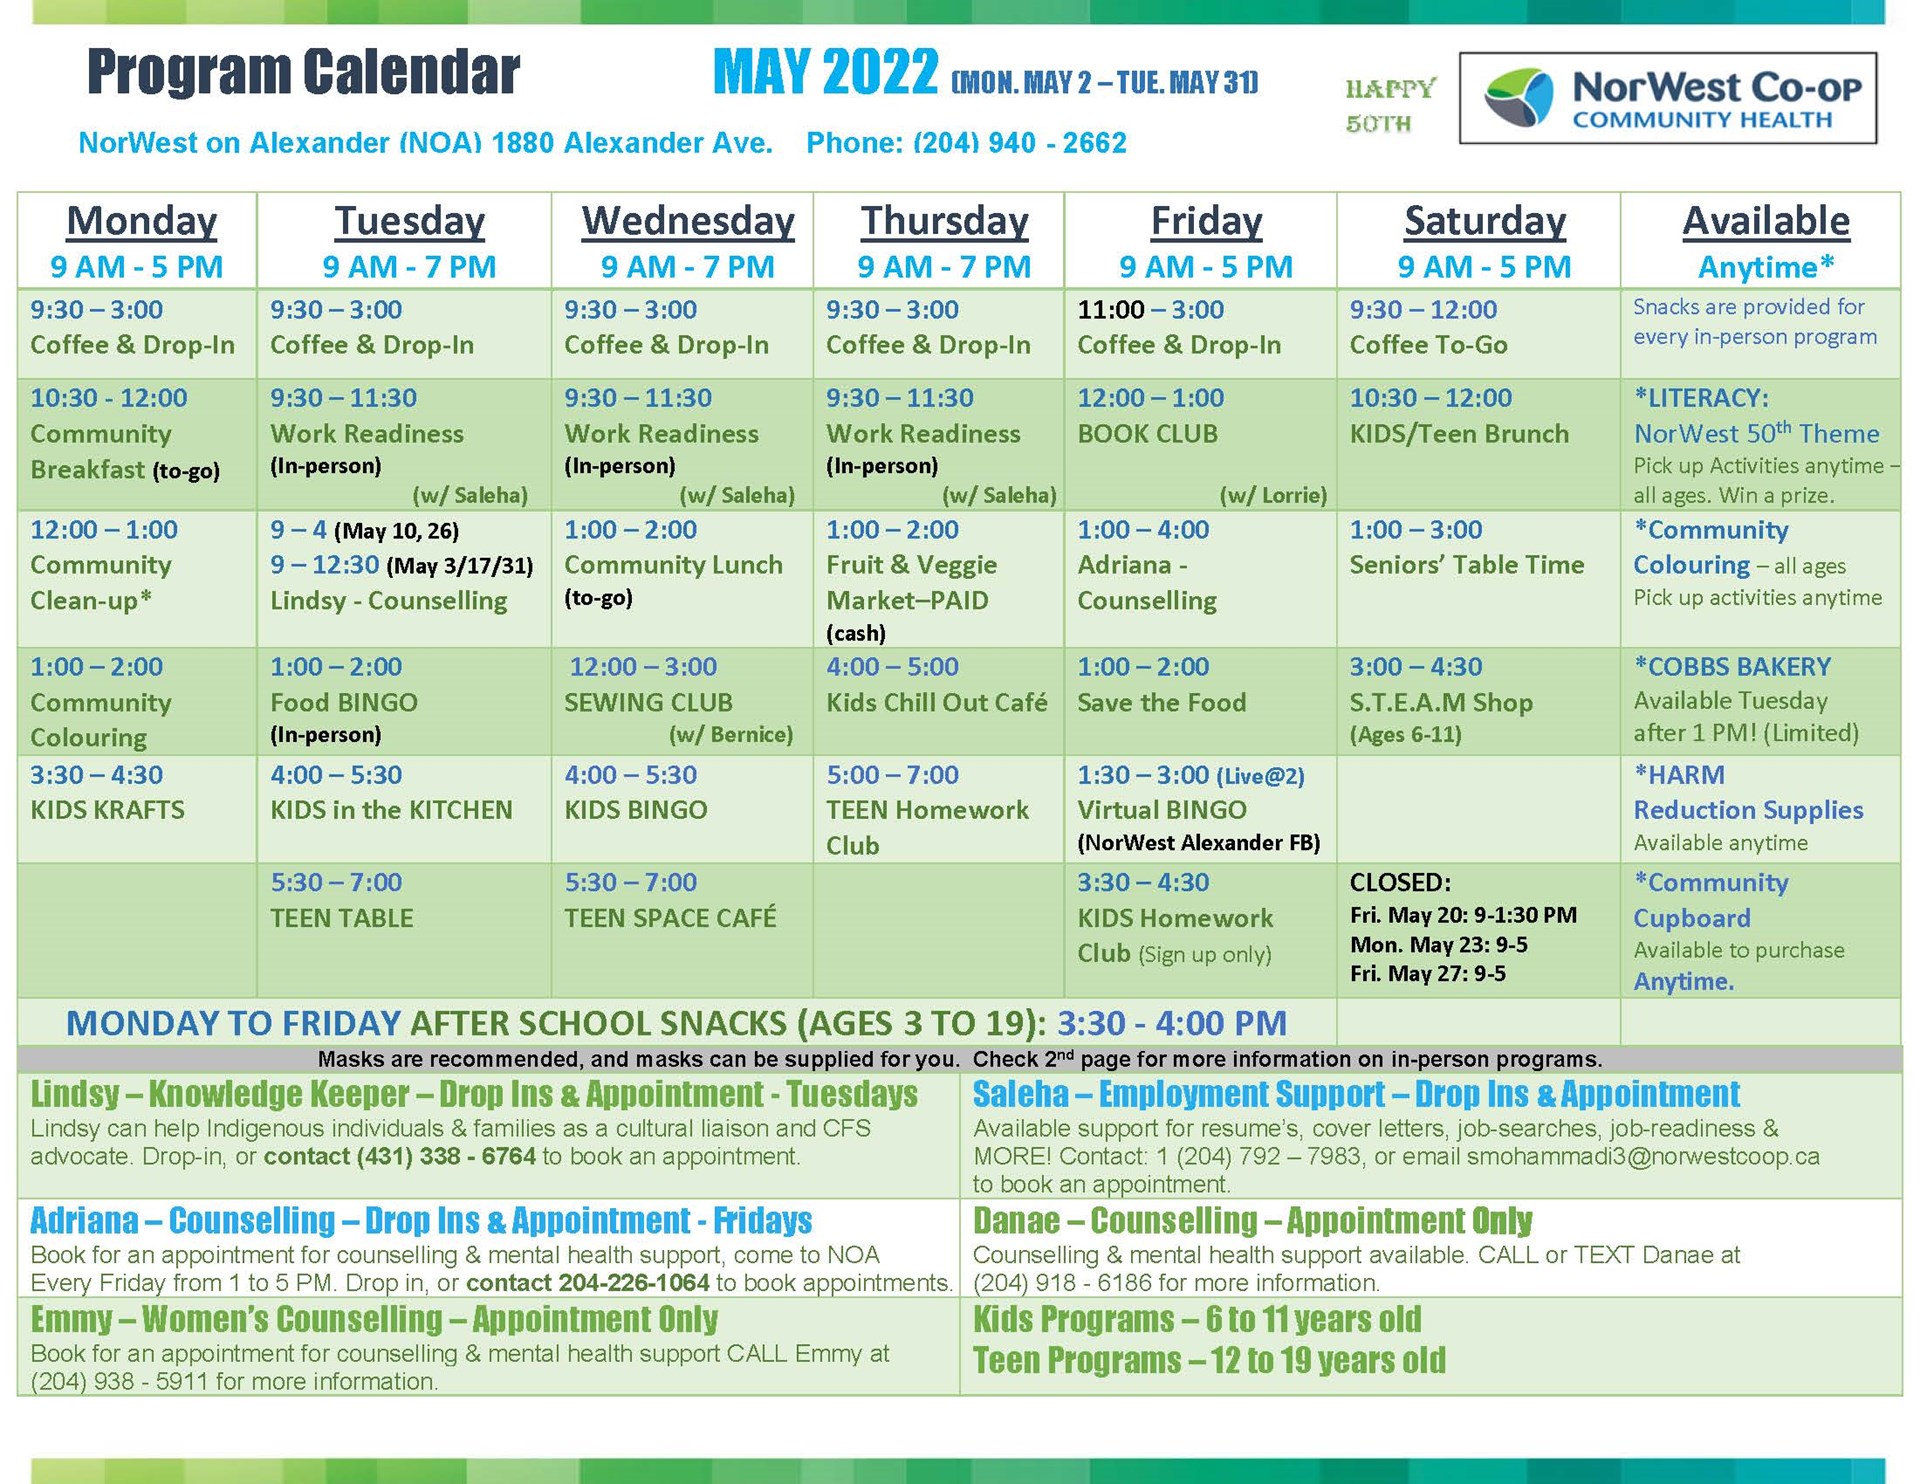 NorWest Calendar May 2022_Page_1.jpg